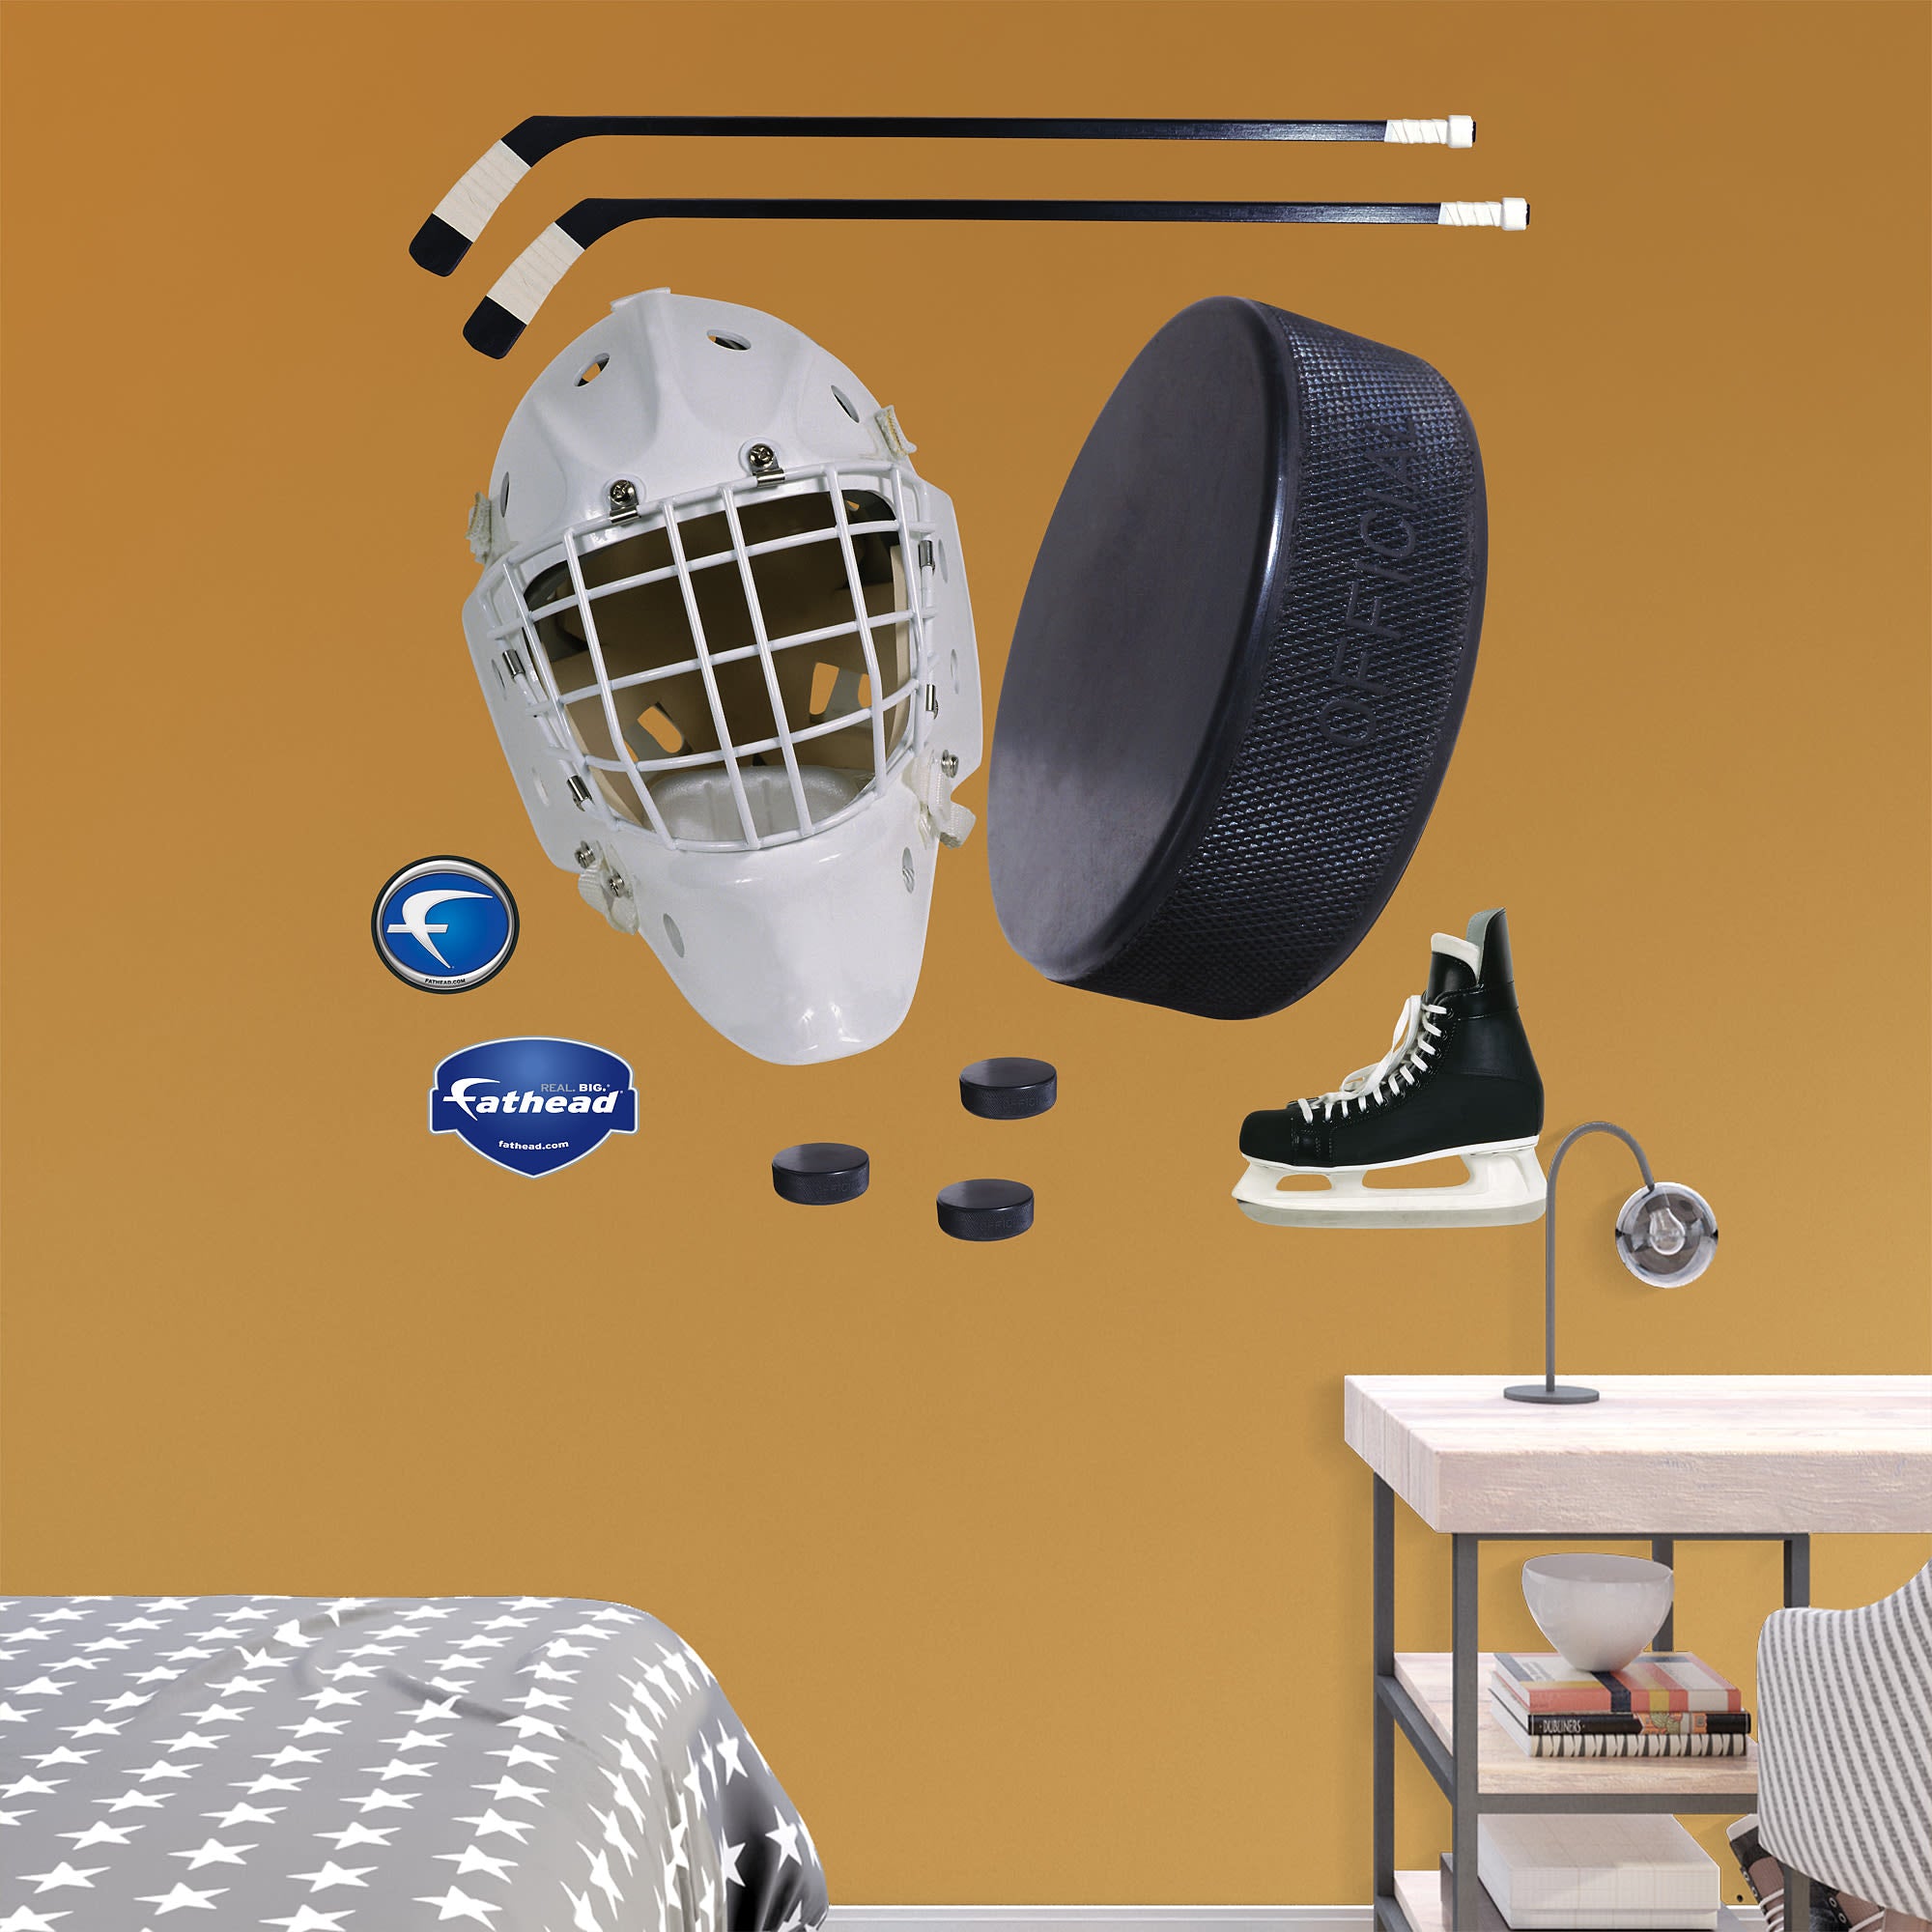 Hockey: Assorted Graphics - Removable Vinyl Decal 52"W x 39.5"H by Fathead